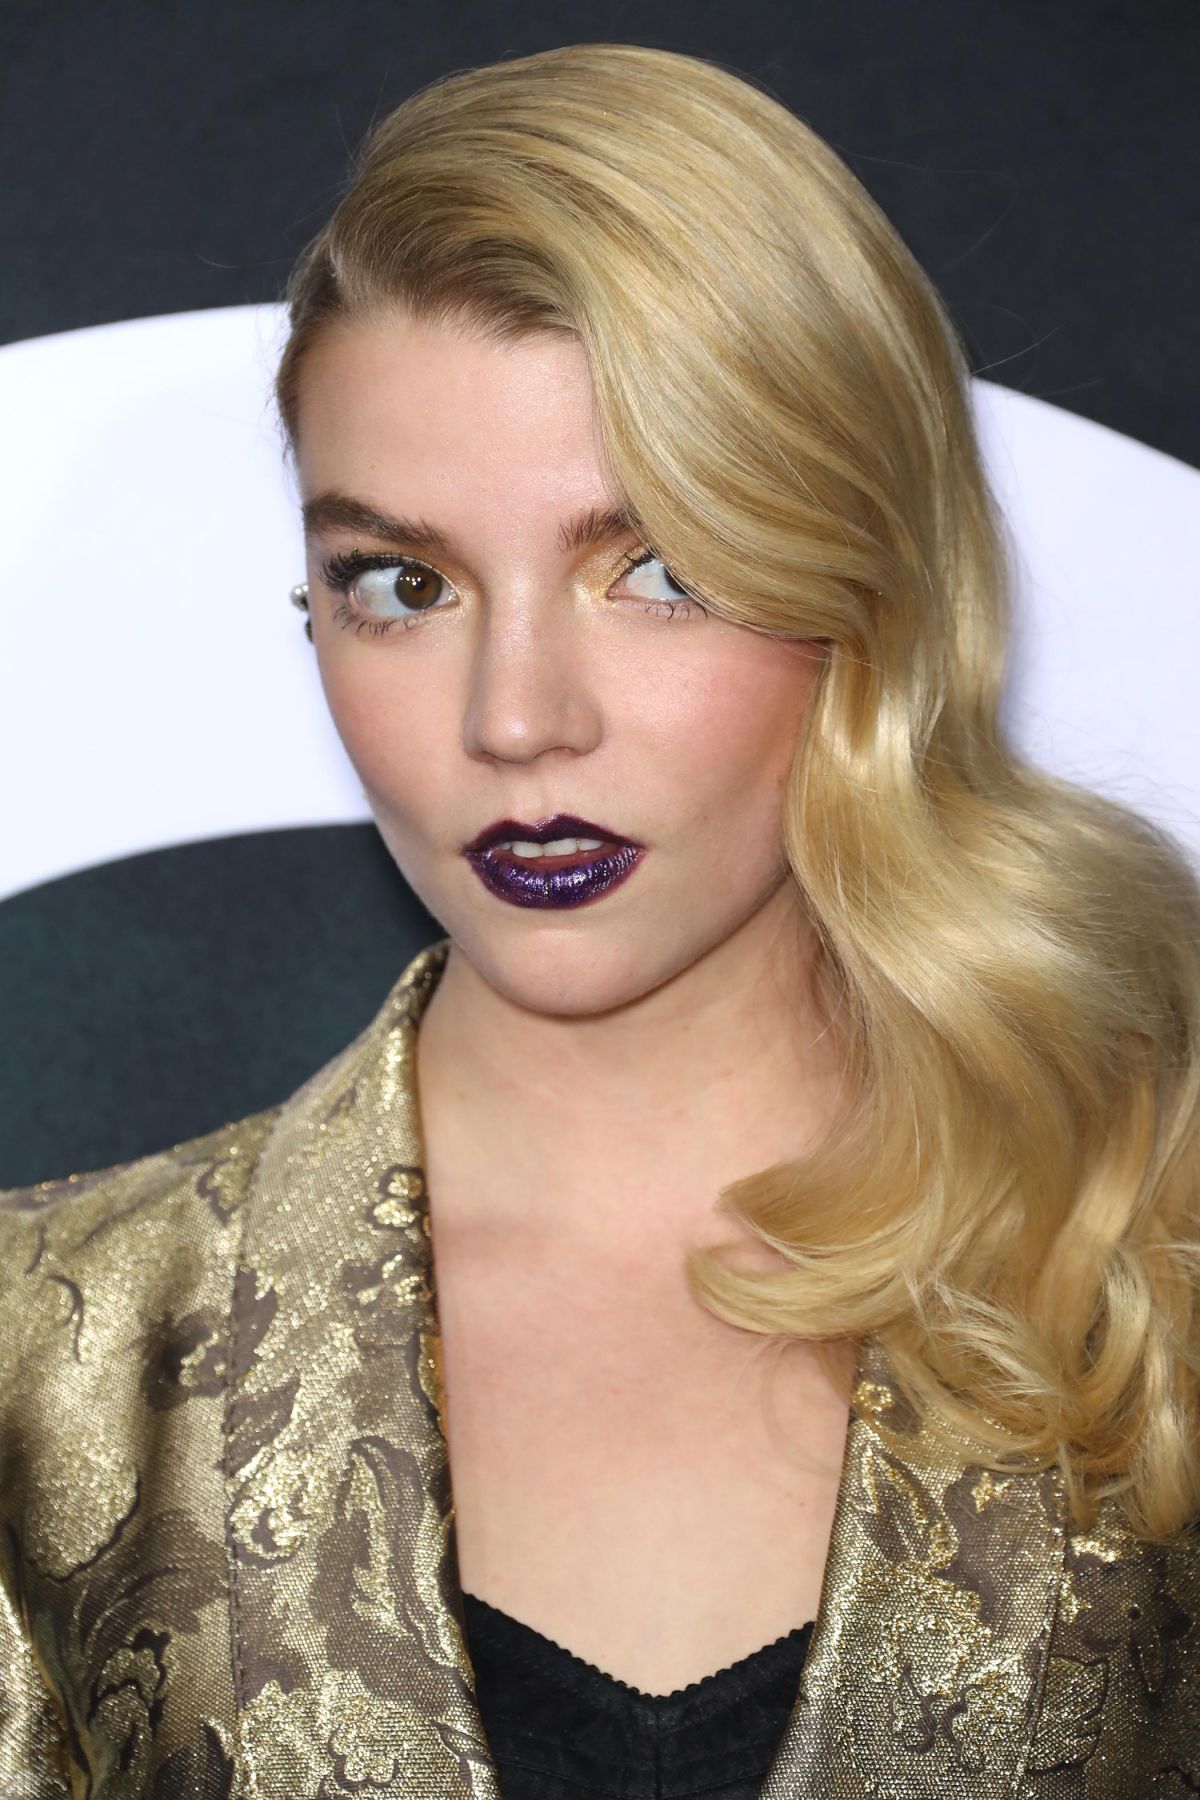 ANYA TAYLOR-JOY at Glass Premiere in New York 01/15/2019 – HawtCelebs